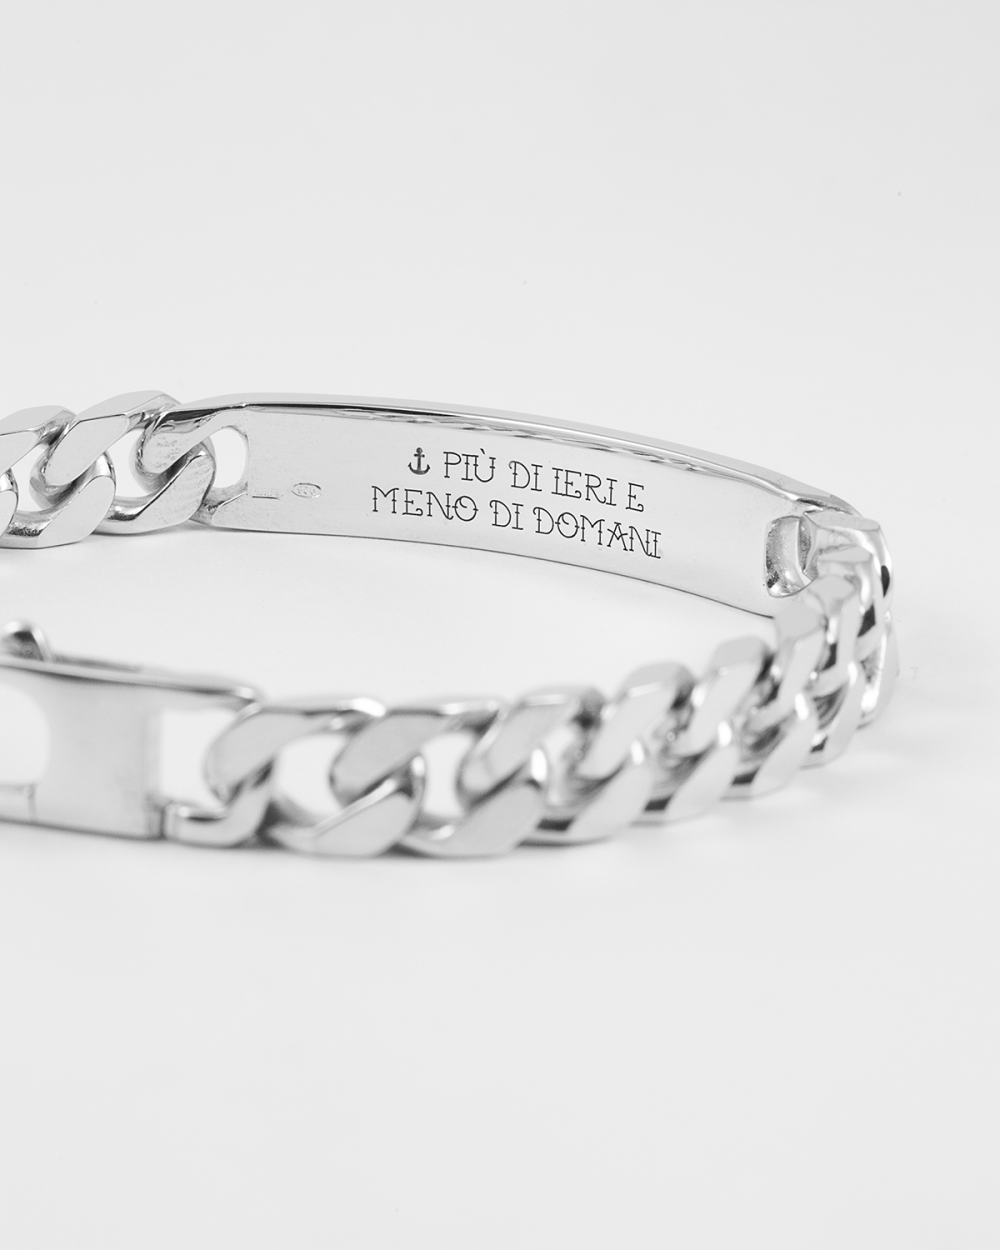 SQUARE CURB BRACELET 300 WITH PLATE